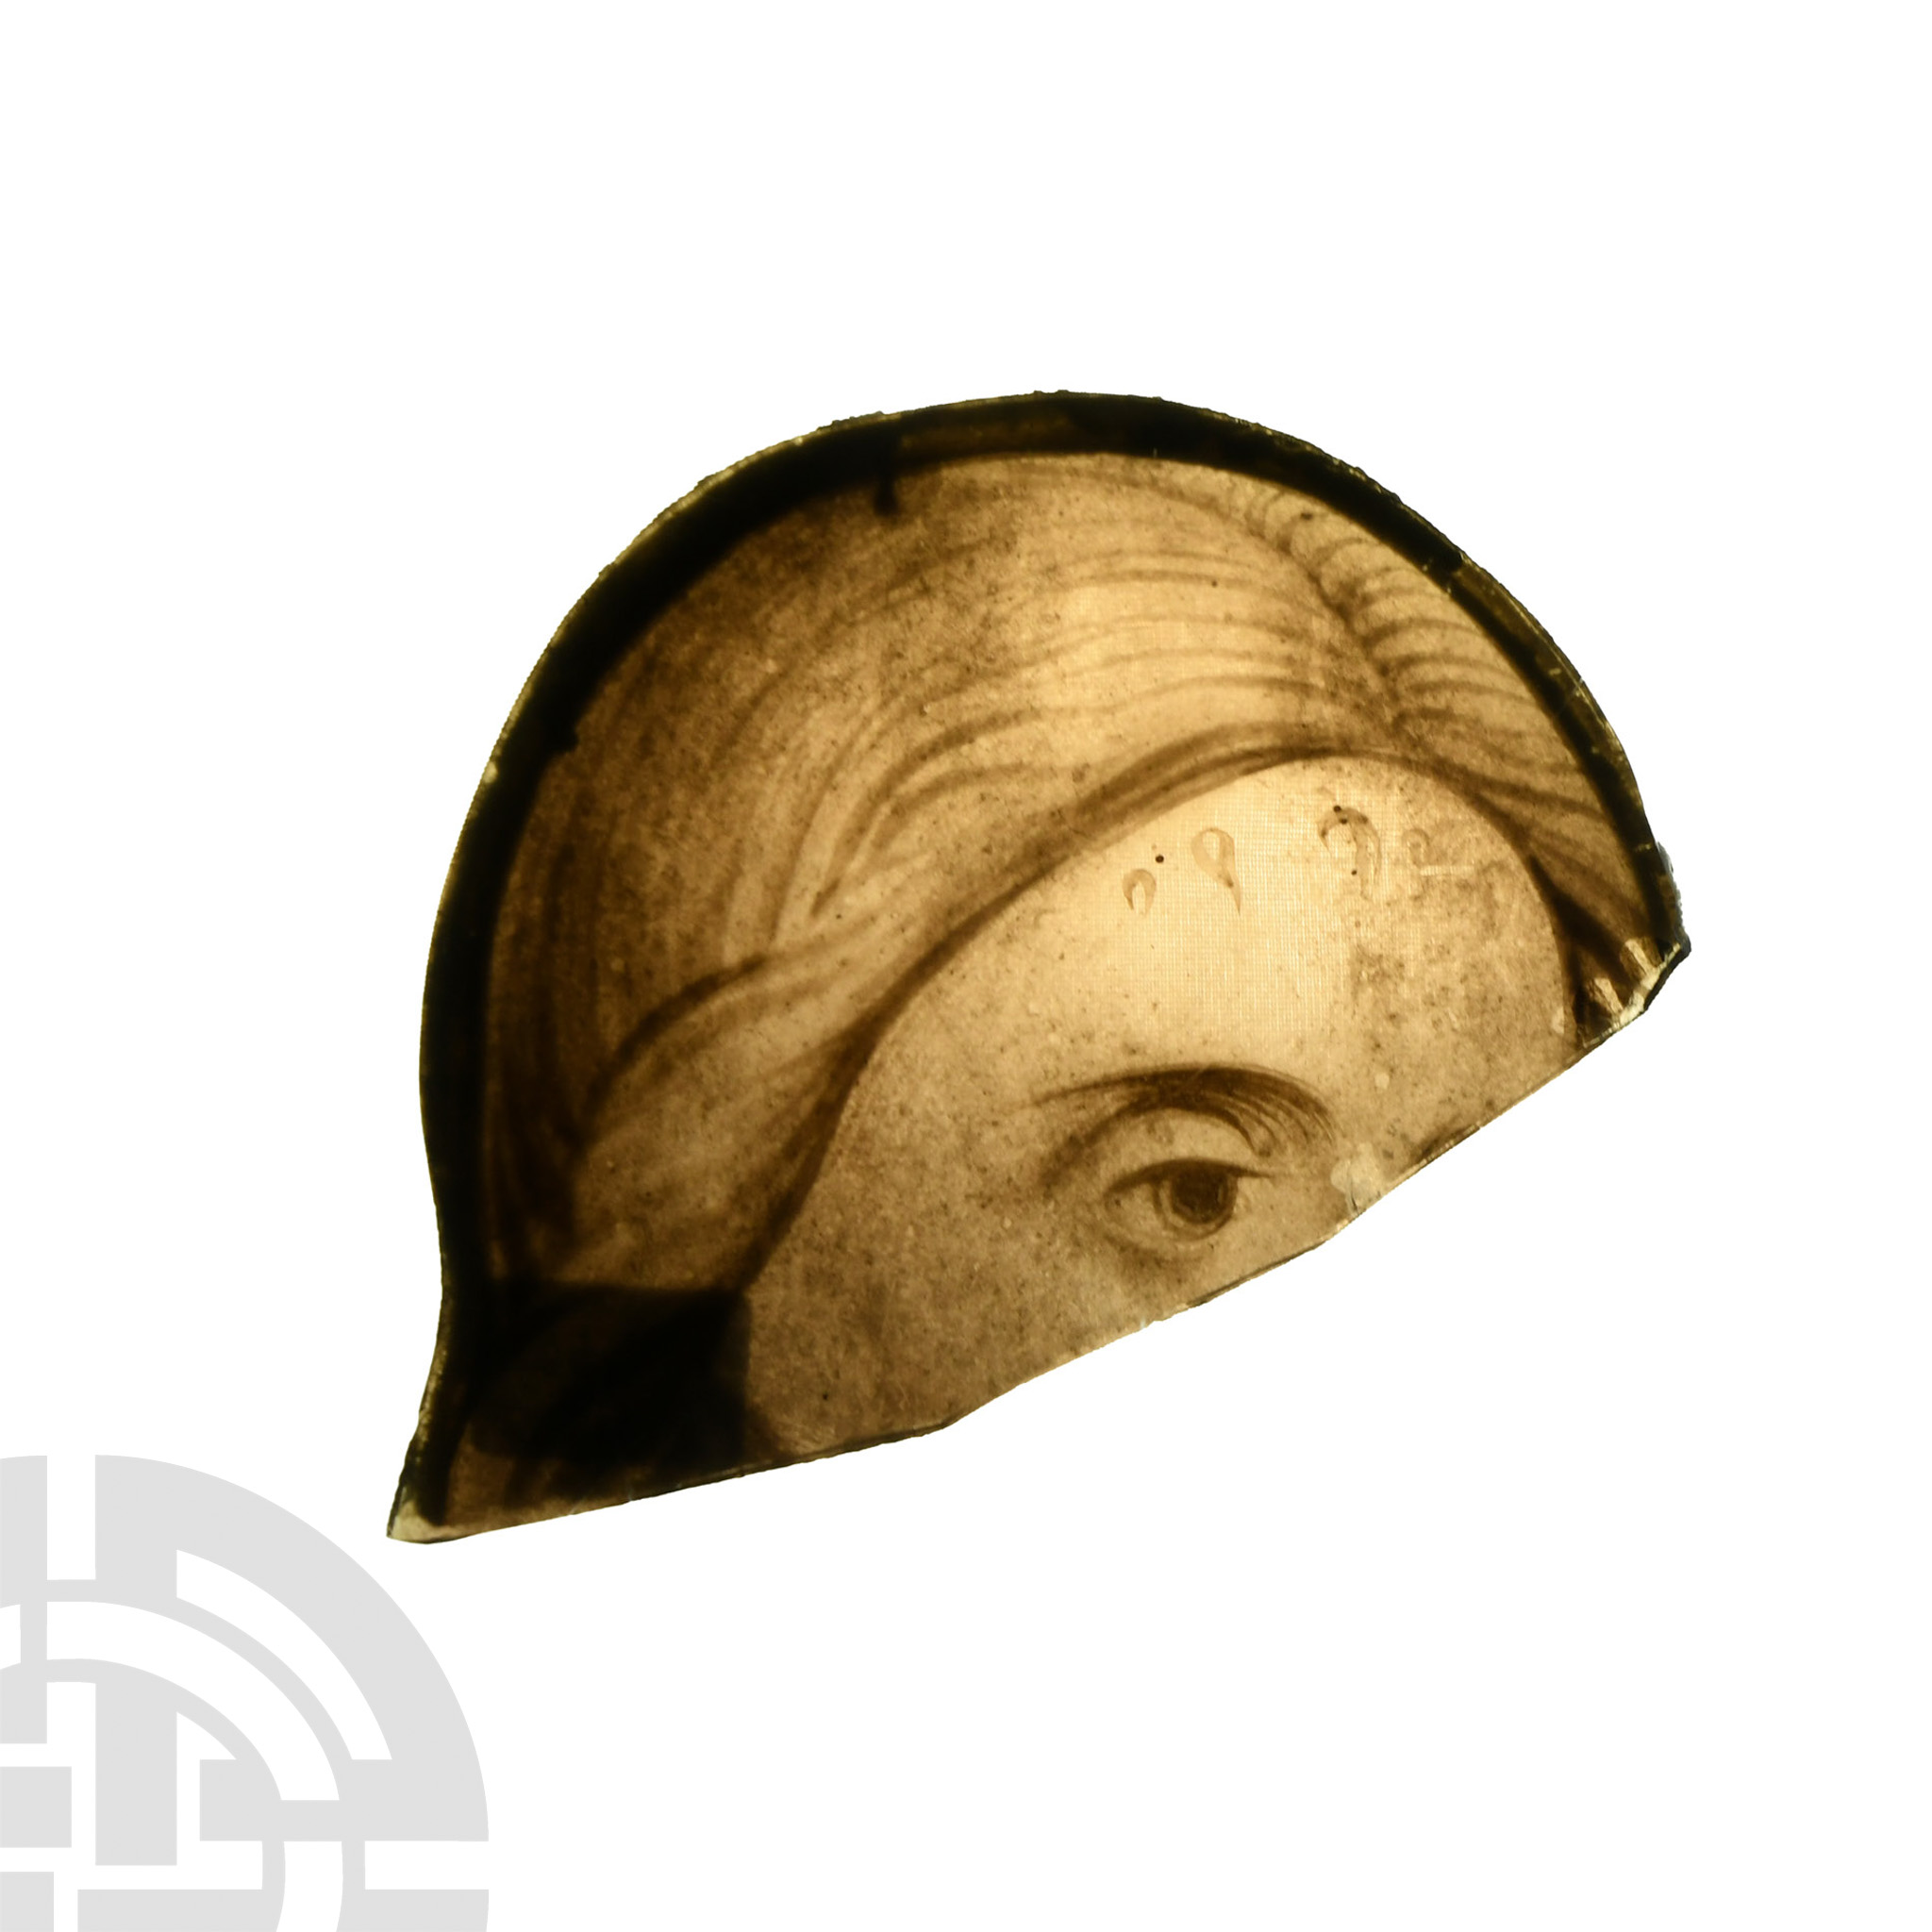 Tudor Period Stained Glass Fragment of a Female Head